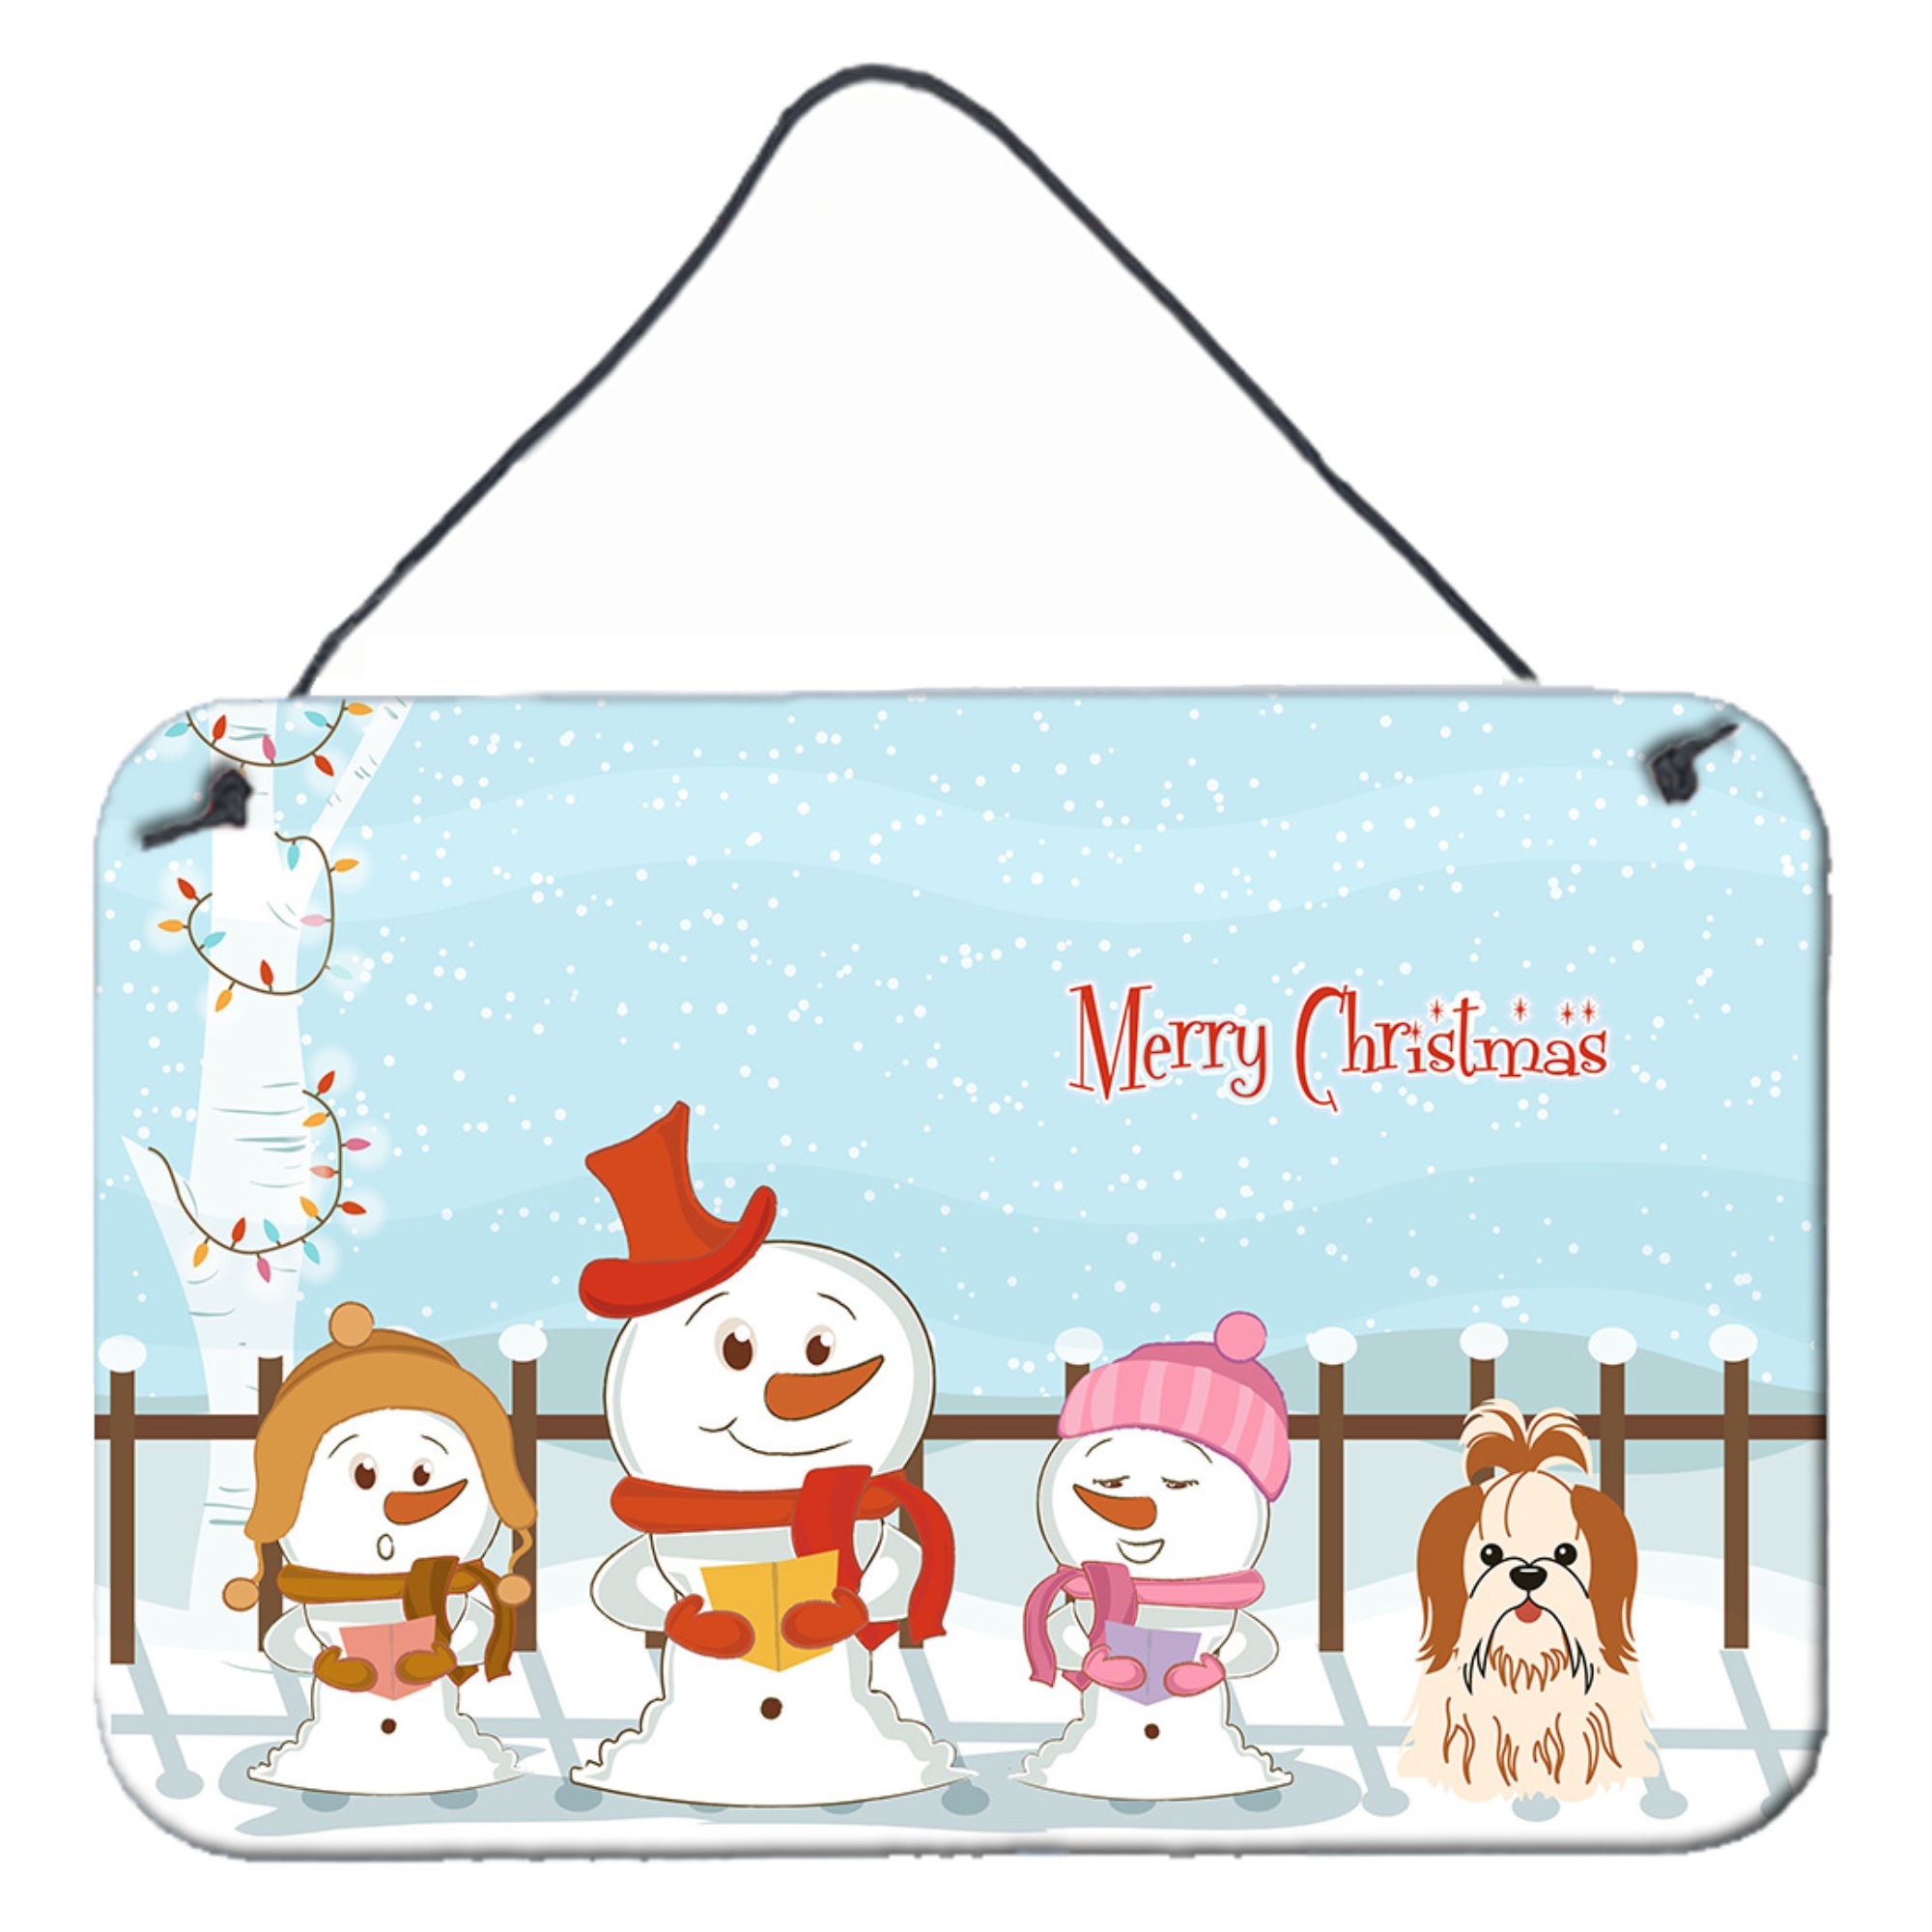 Caroline's Treasures "Caroline's Treasures Merry Christmas Carolers Shih Tzu Red White Wall or Door Hanging Prints BB2418DS812, 8"" x 12"", Multicolo